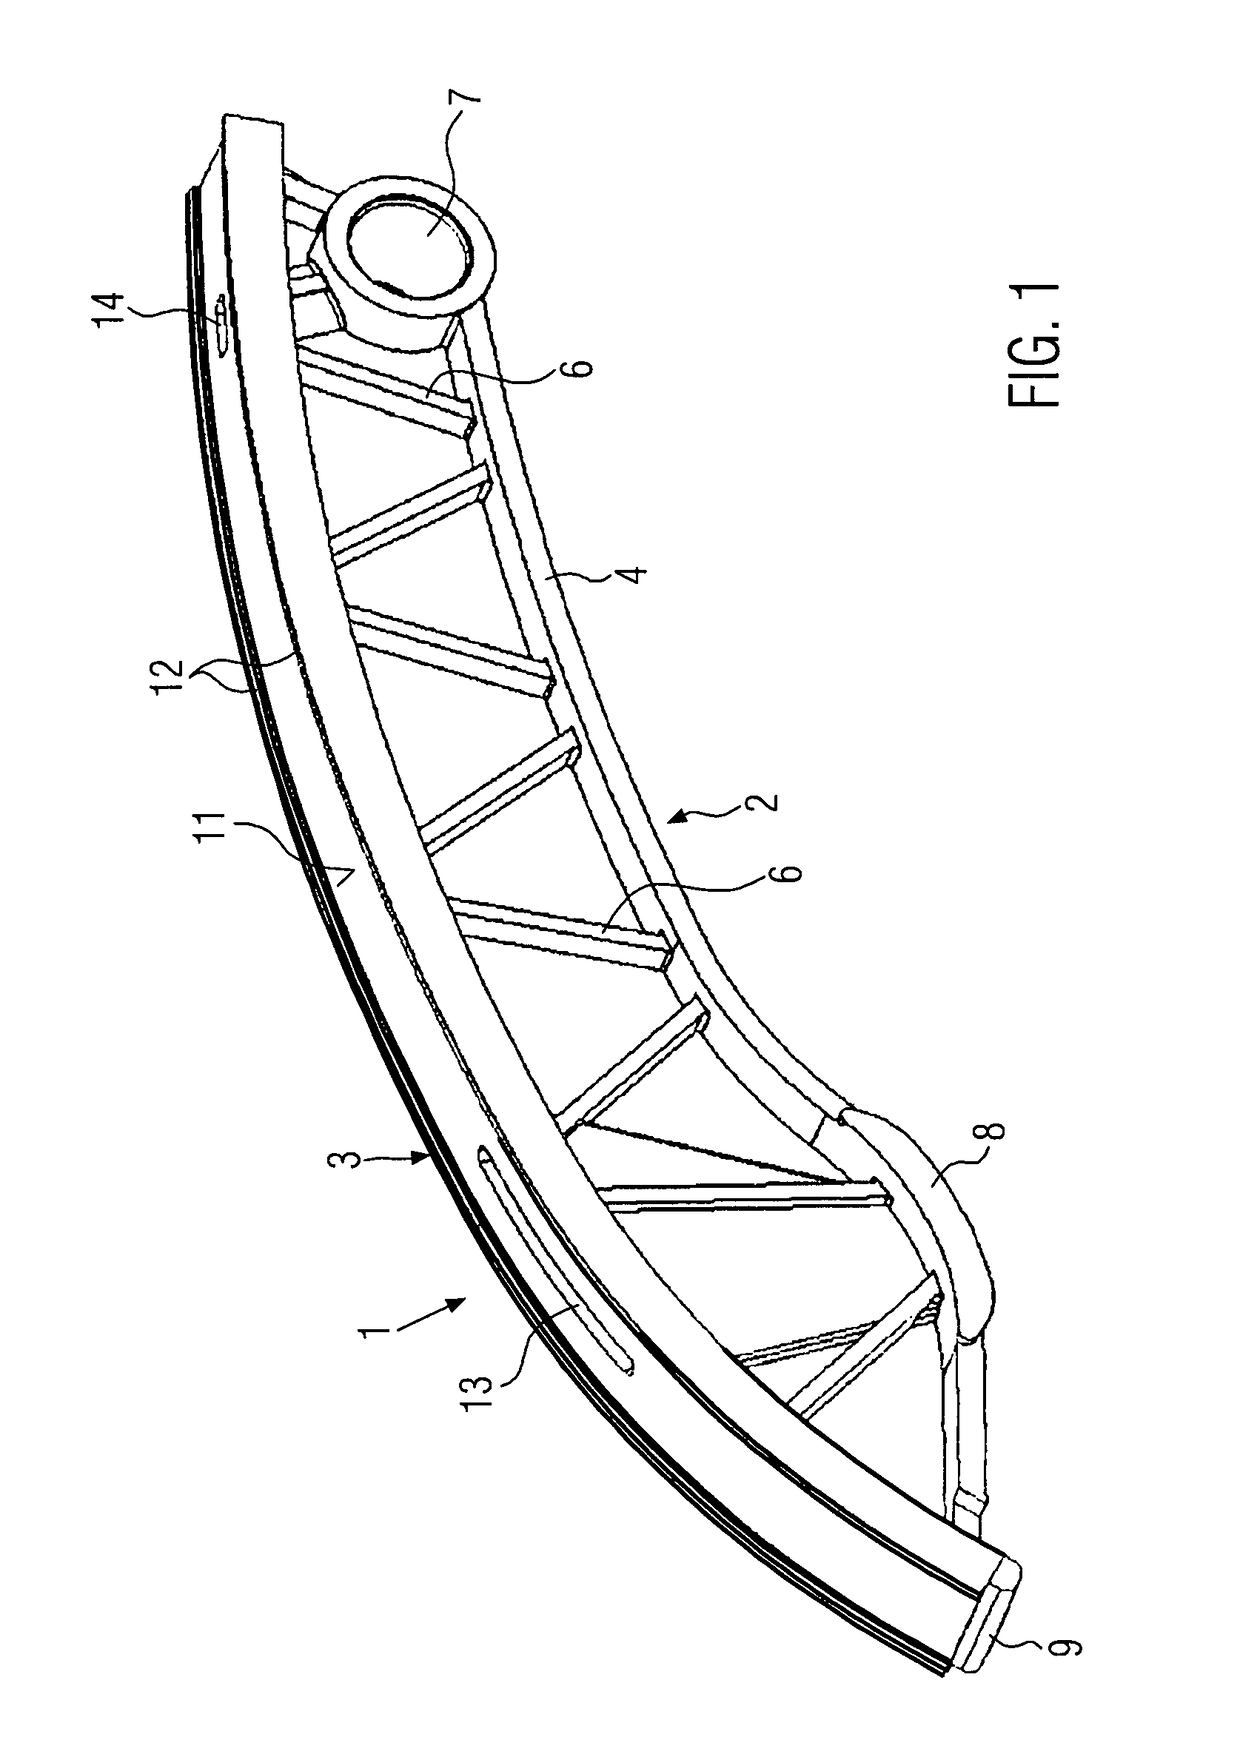 Tensioning or guide rail having an extruded sliding lining body